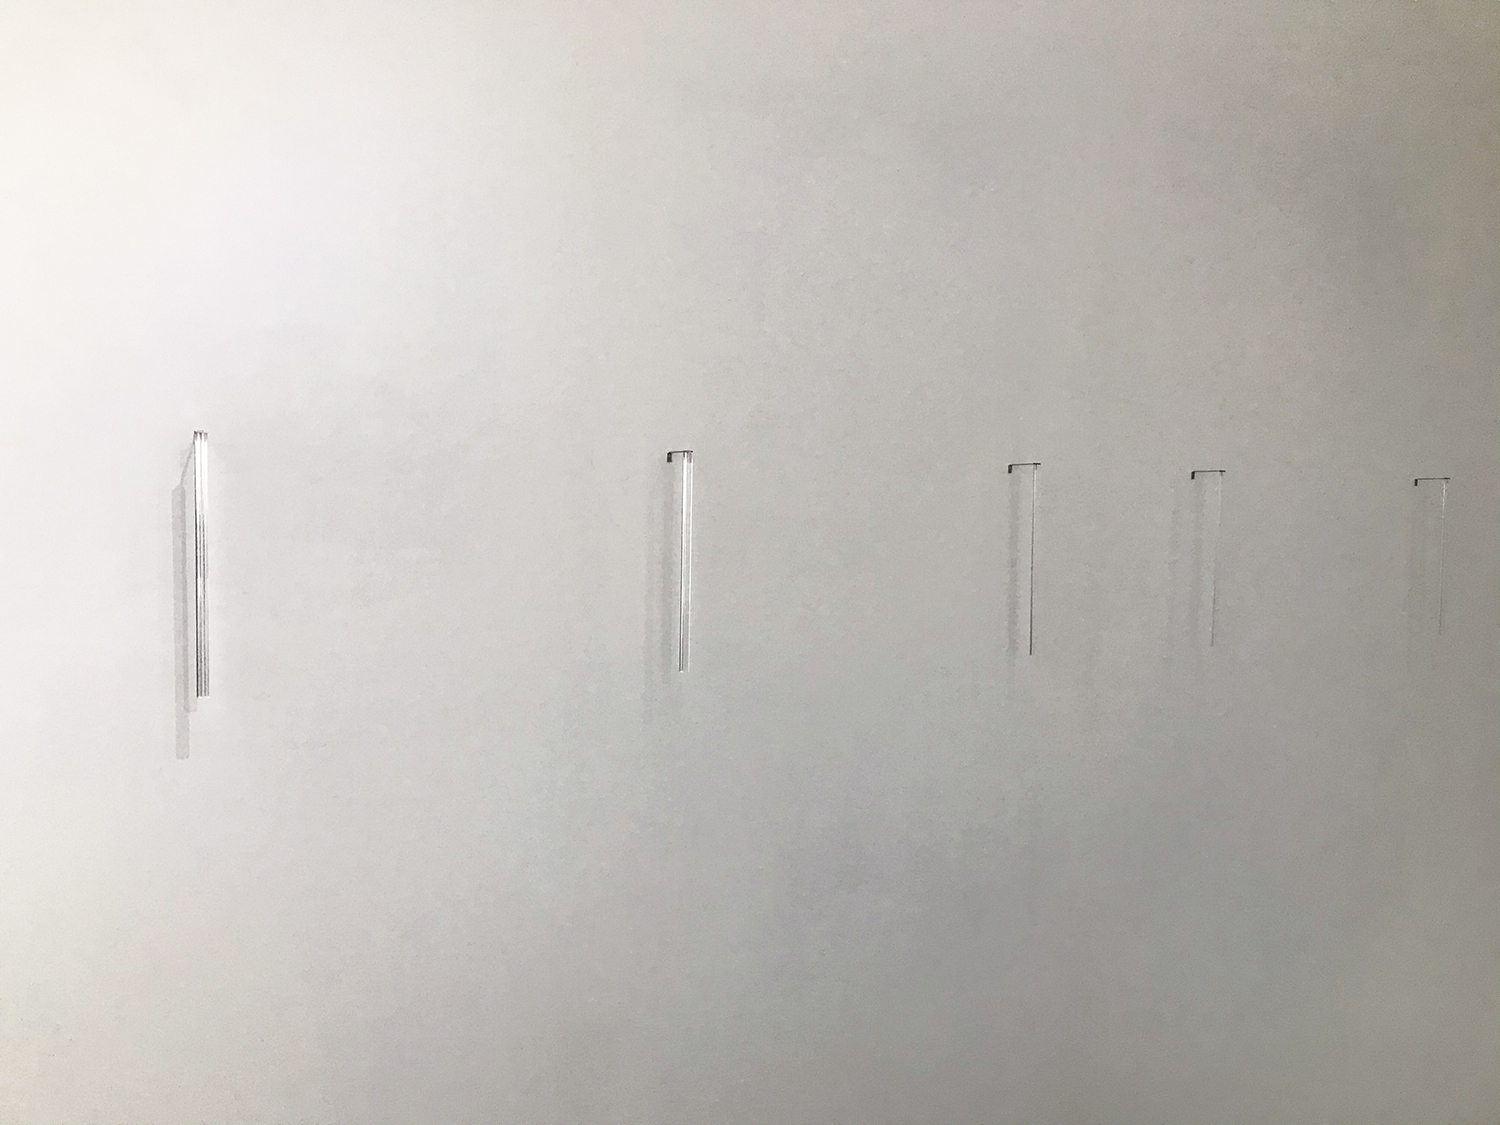 Installation view / 池田啓子｜KEIKO IKEDA<br>Untitled, clear acrylic (triangular prism), 14 x 7 x 300 mm, 60 mm (metal), 2022 each